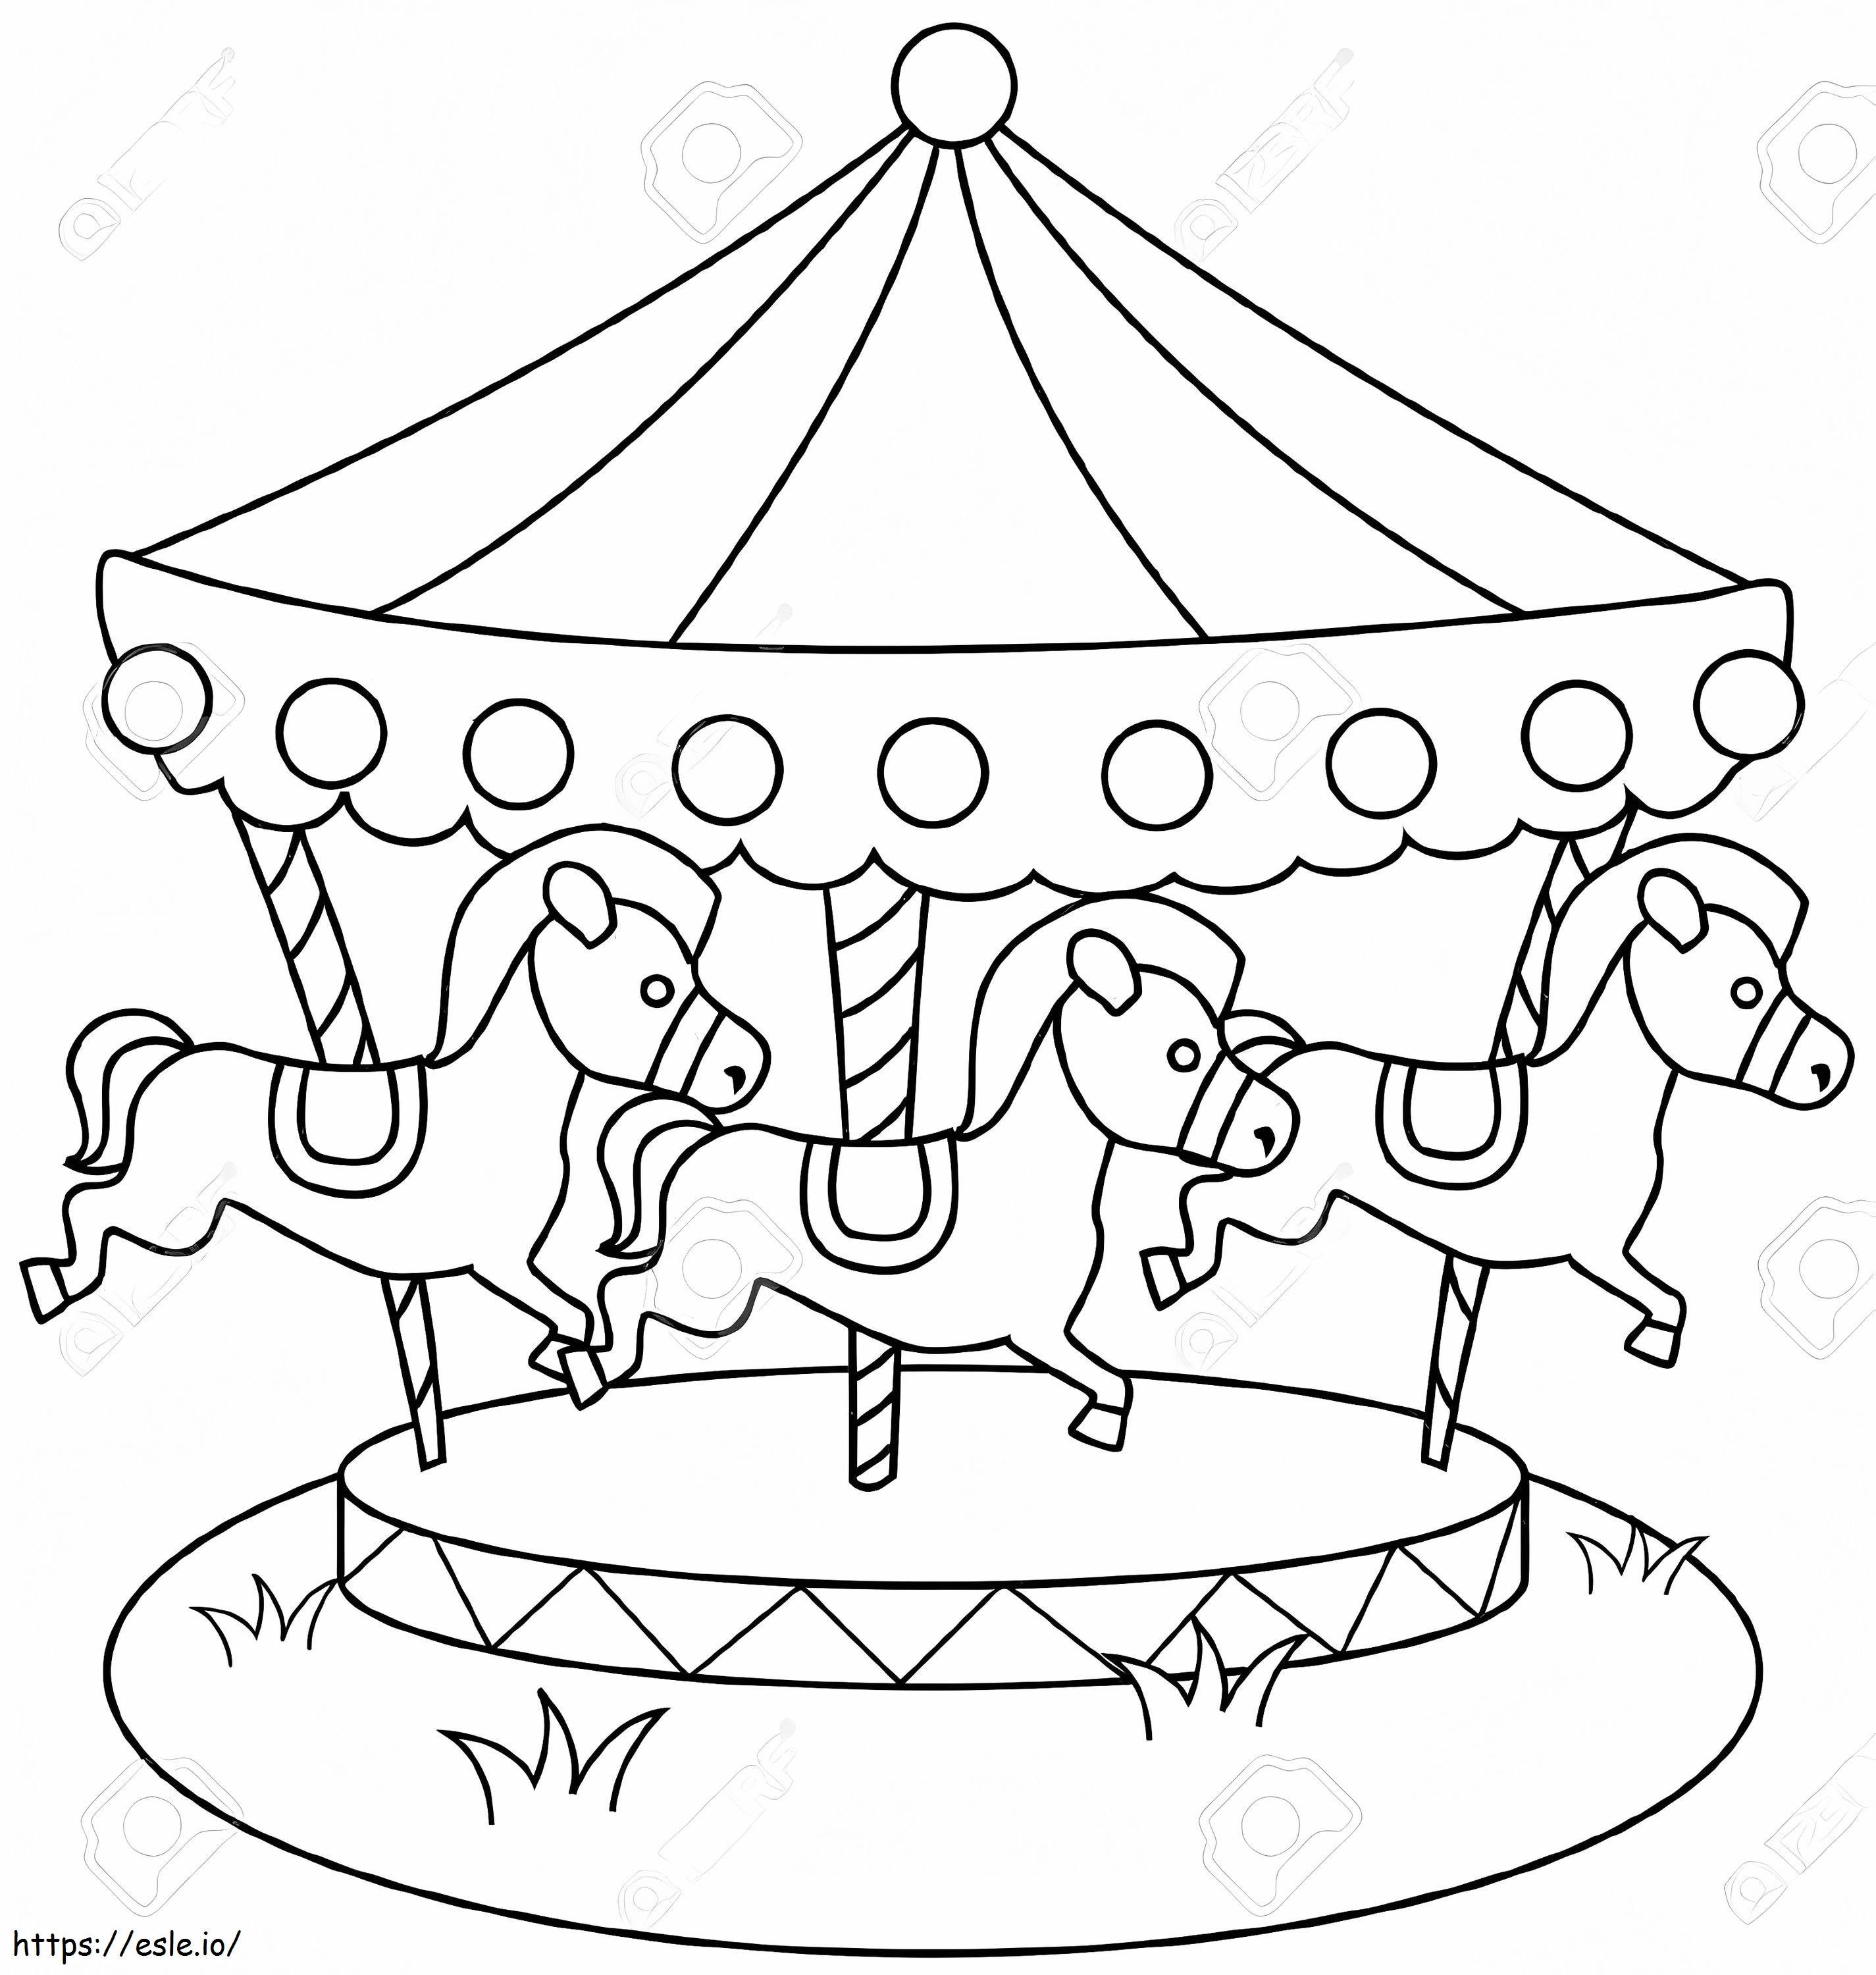 Easy Carousel coloring page